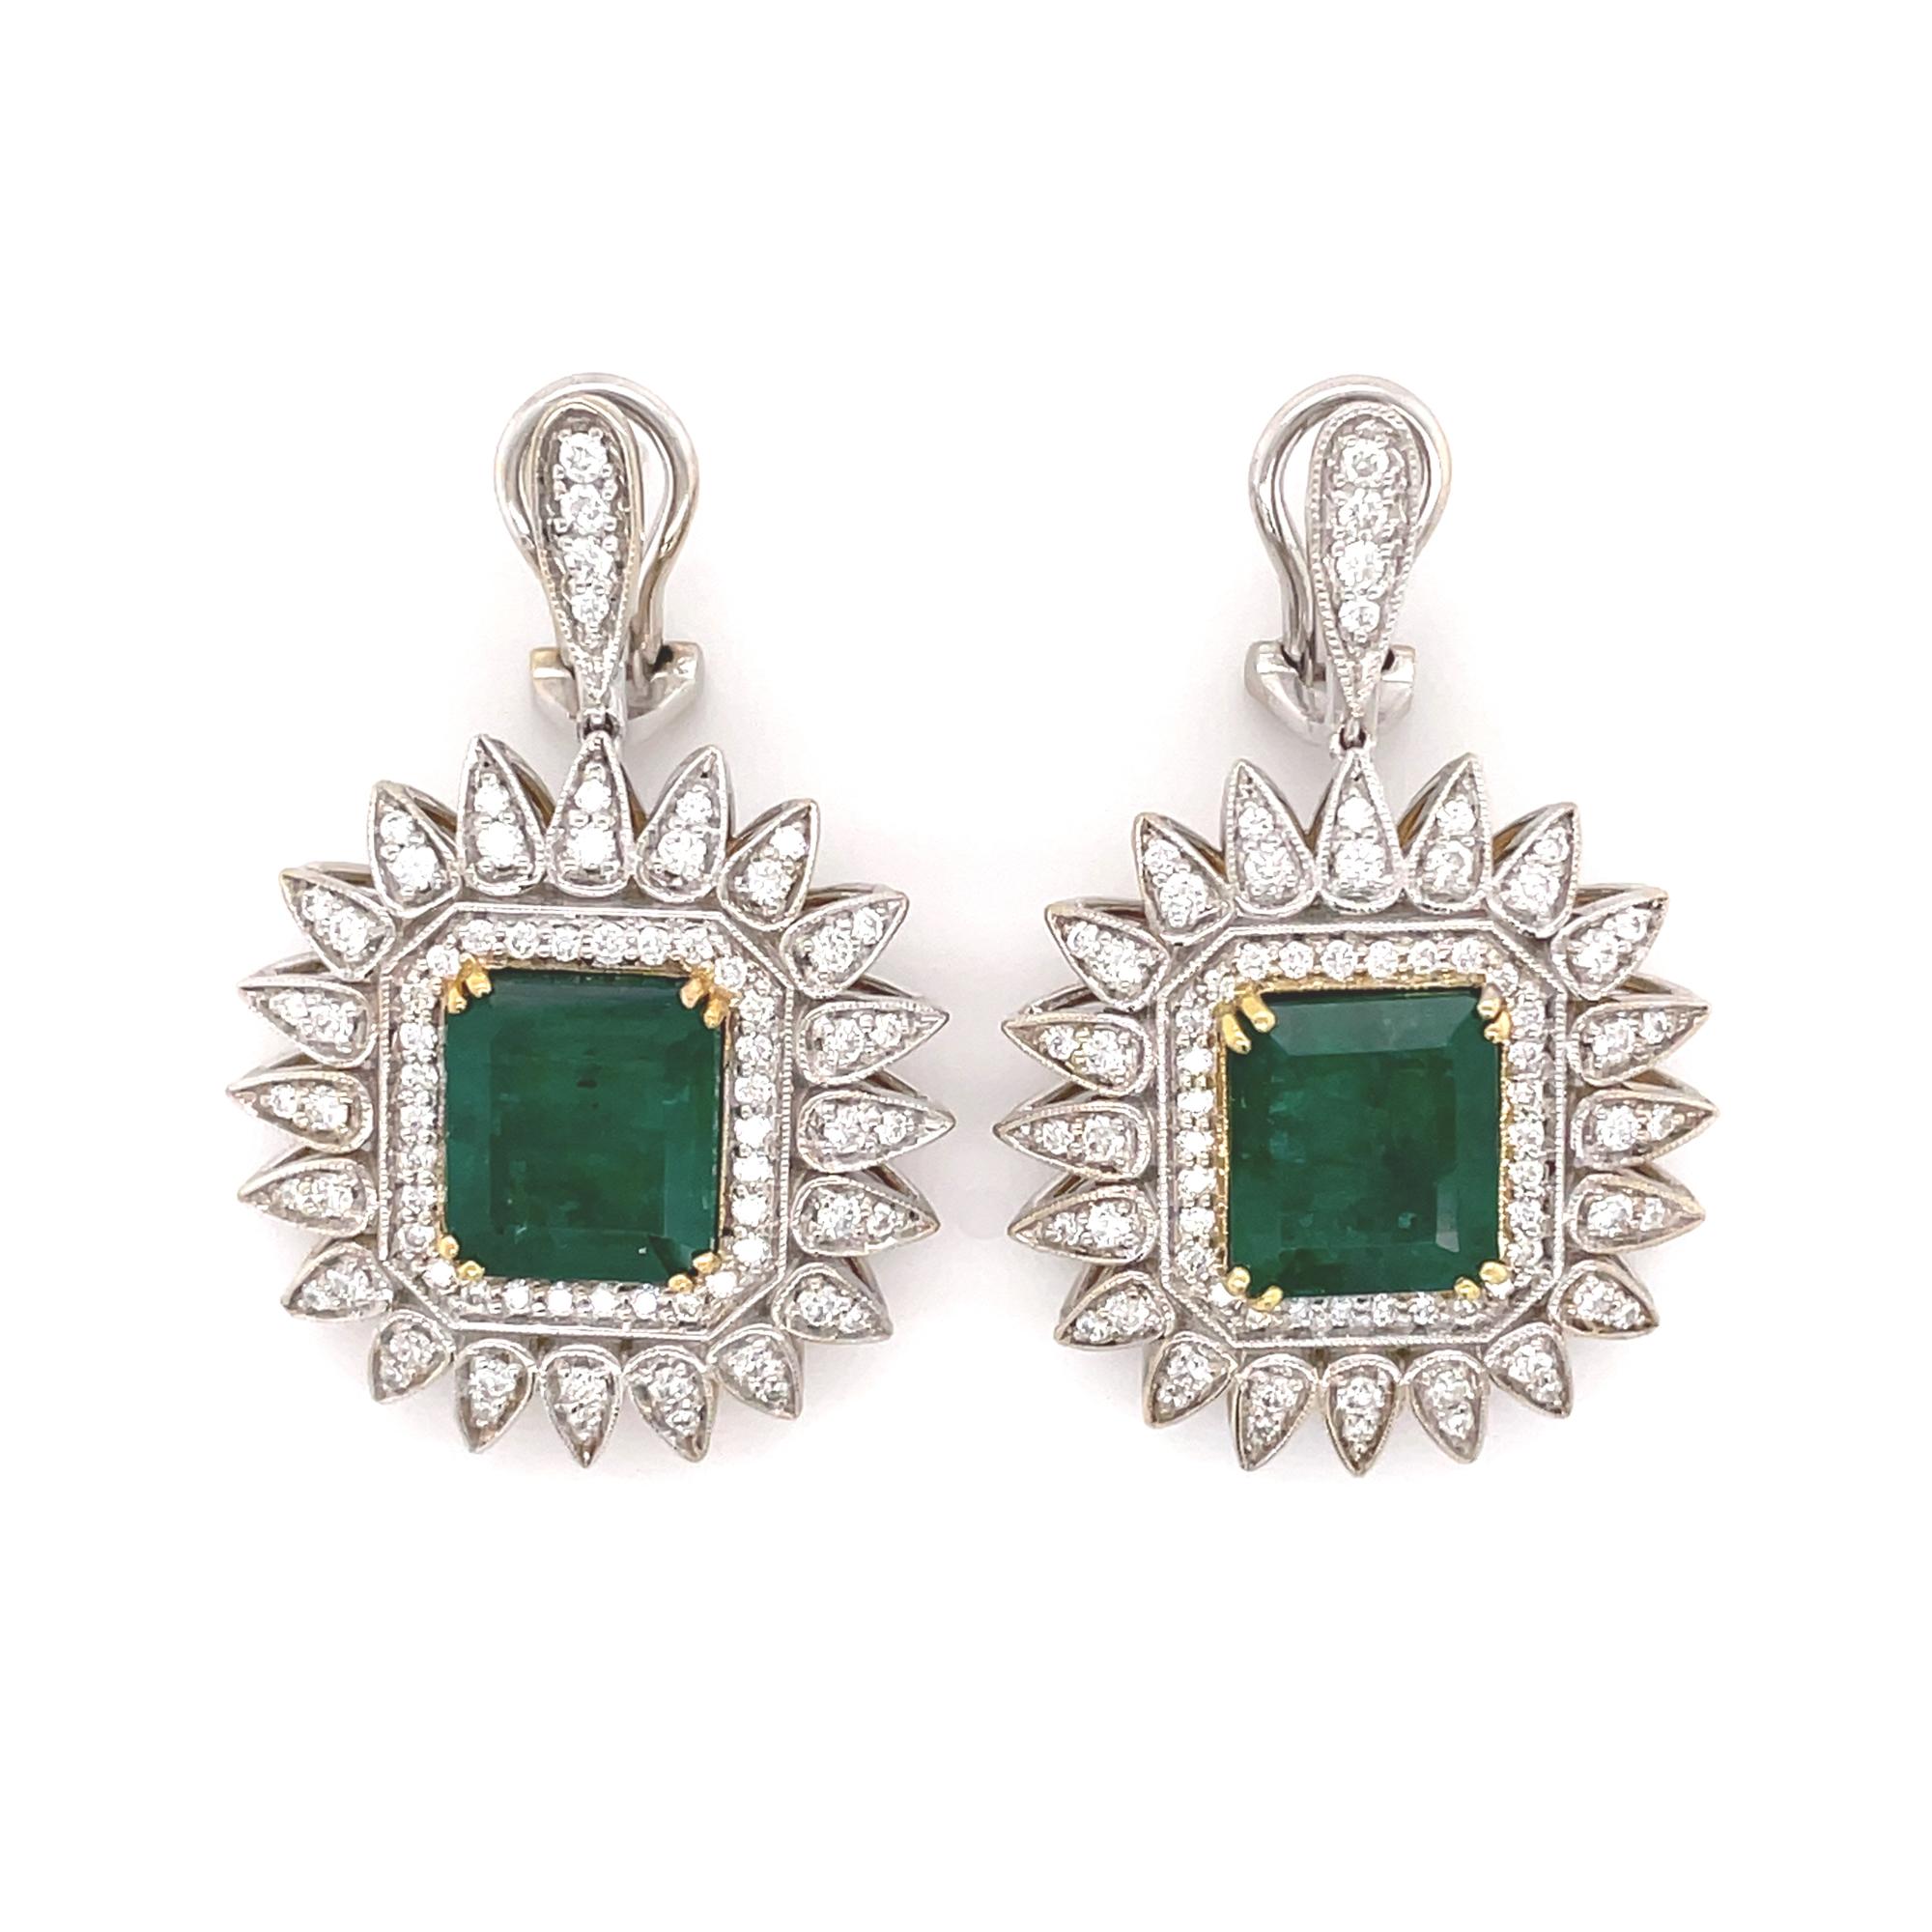 Delight the one you adore with this charming Green Emerald and diamond jewelry set. Crafted in high polished 18K white and yellow gold. The pendant features a prong set emerald cut square shaped emerald weighing 4.57cts with shimmering round